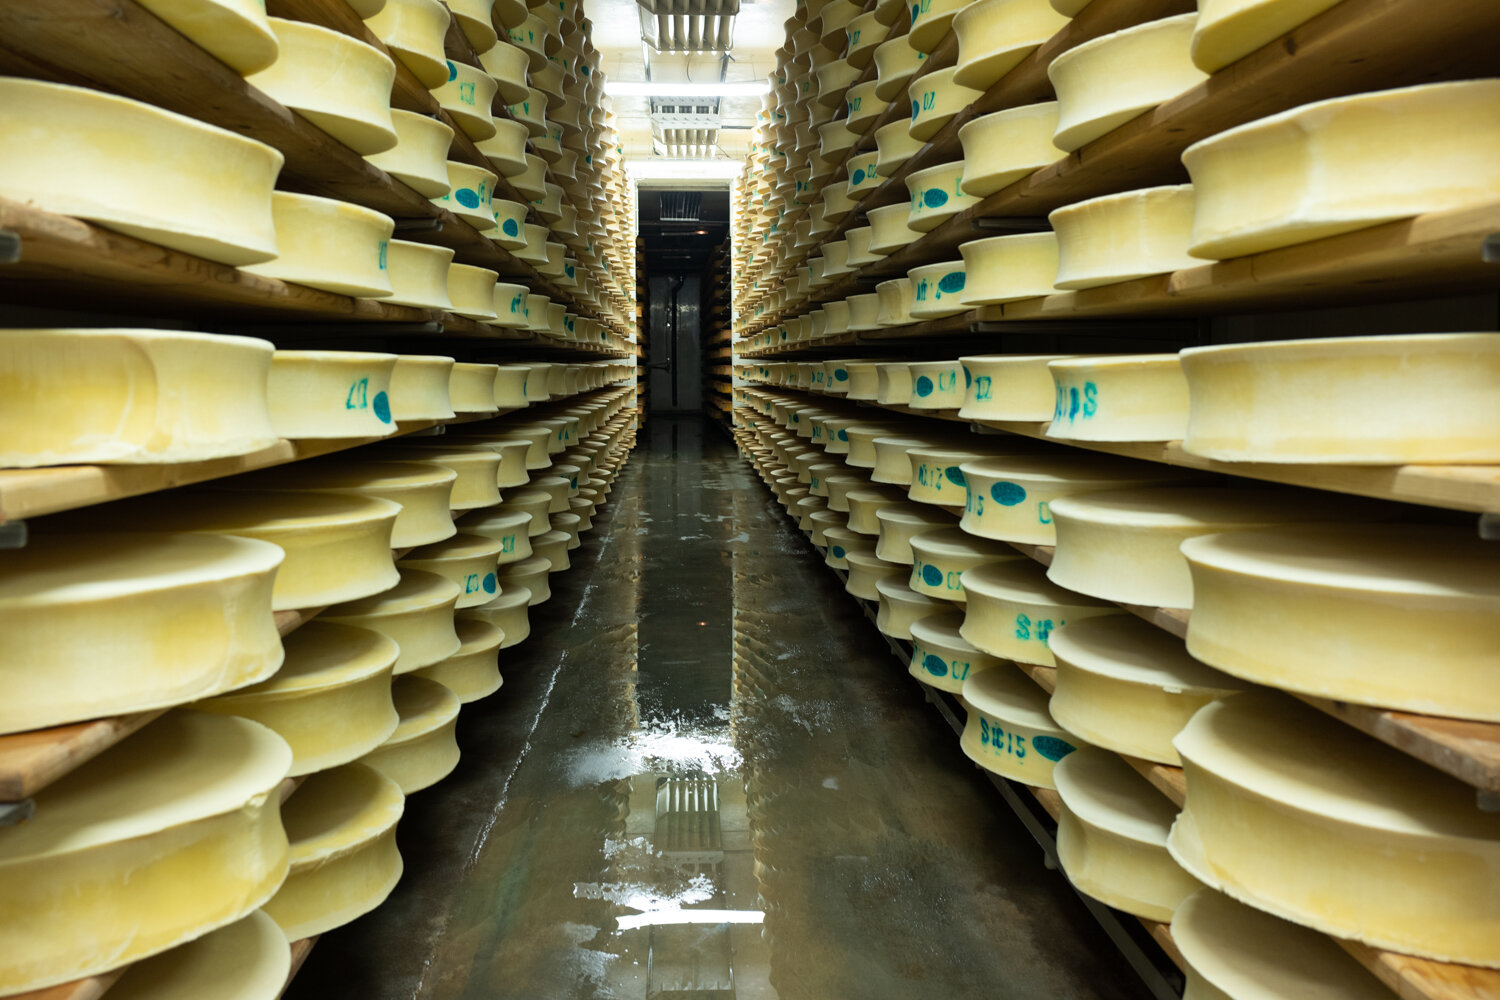  The cellar where cheeses mature during 5 months. 